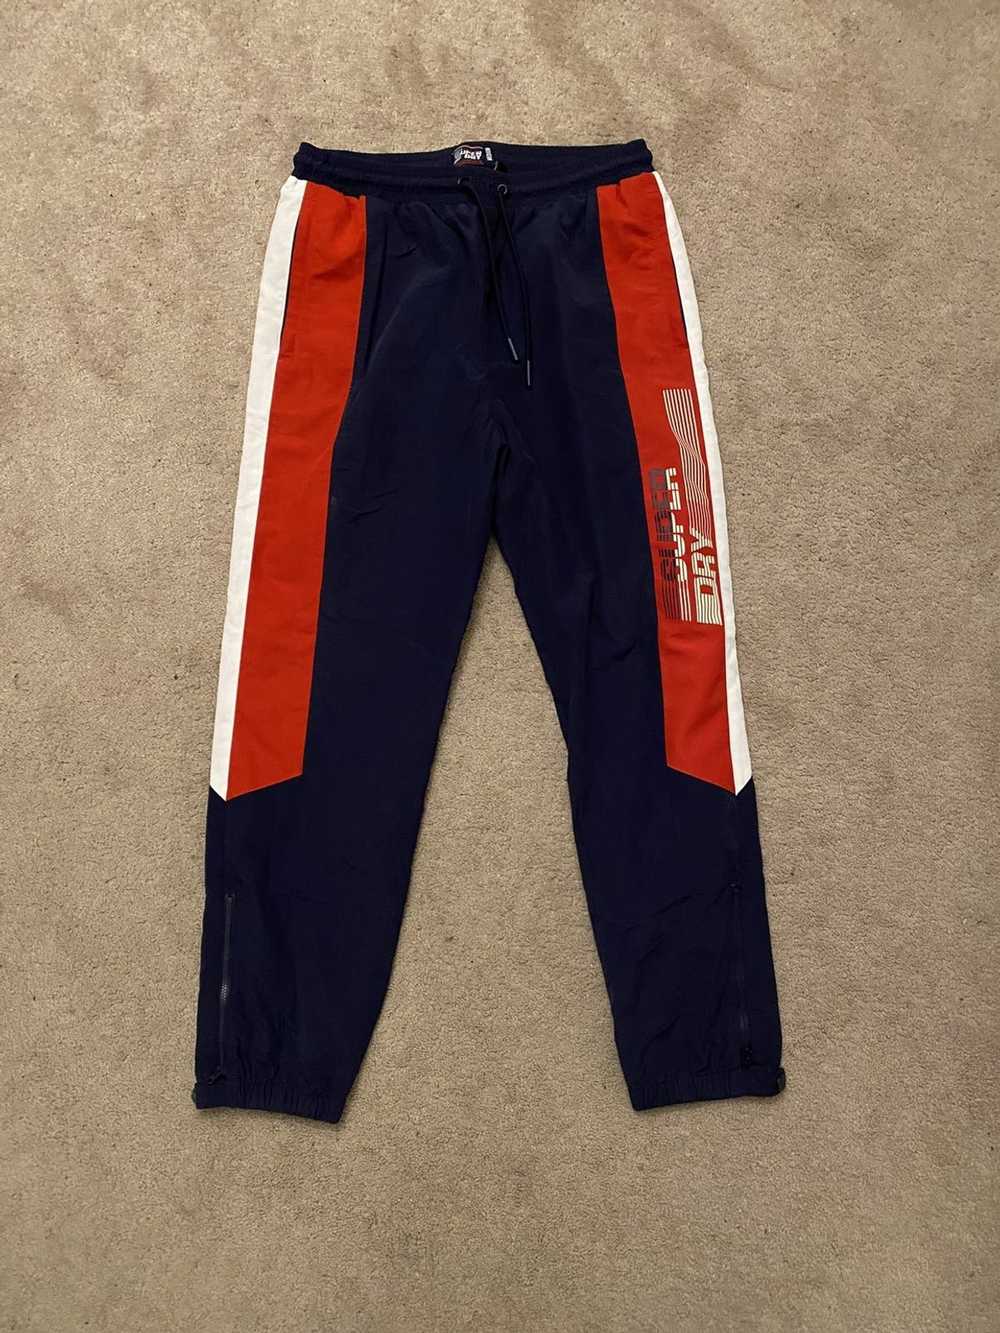 Superdry Superdry TrackPants - image 1